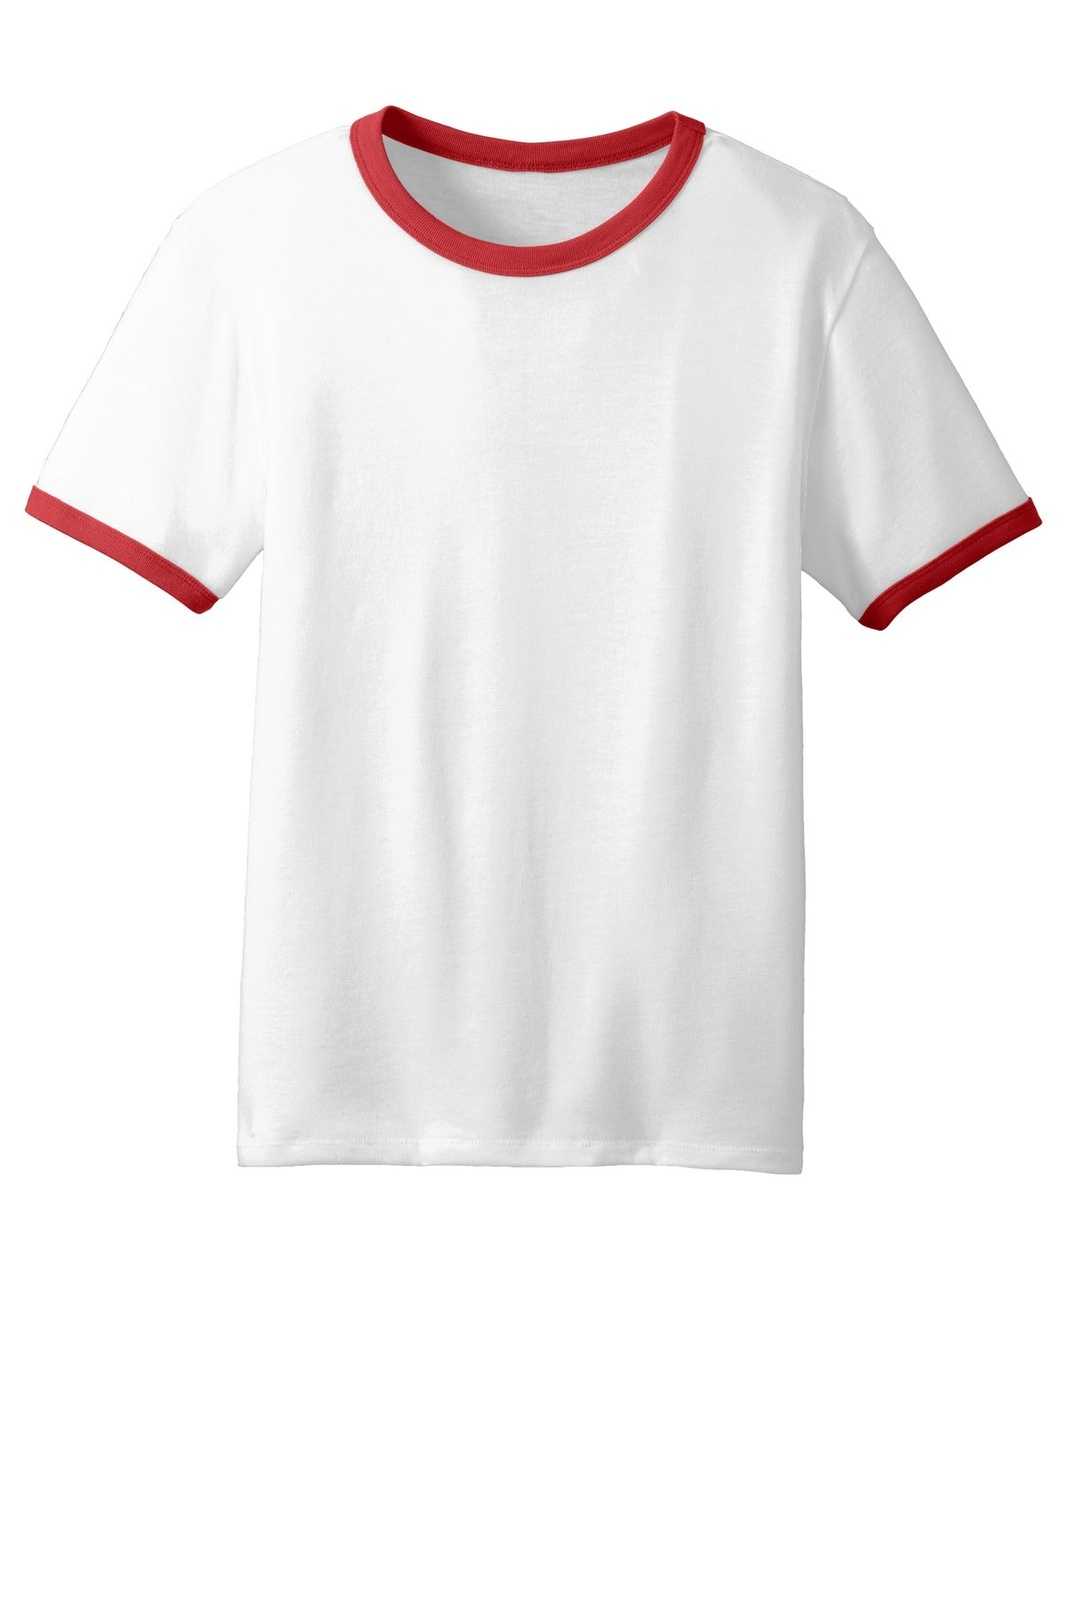 Alternative AA5103 The Keeper Vintage 50/50 Ringer Tee - White Red - HIT a Double - 5